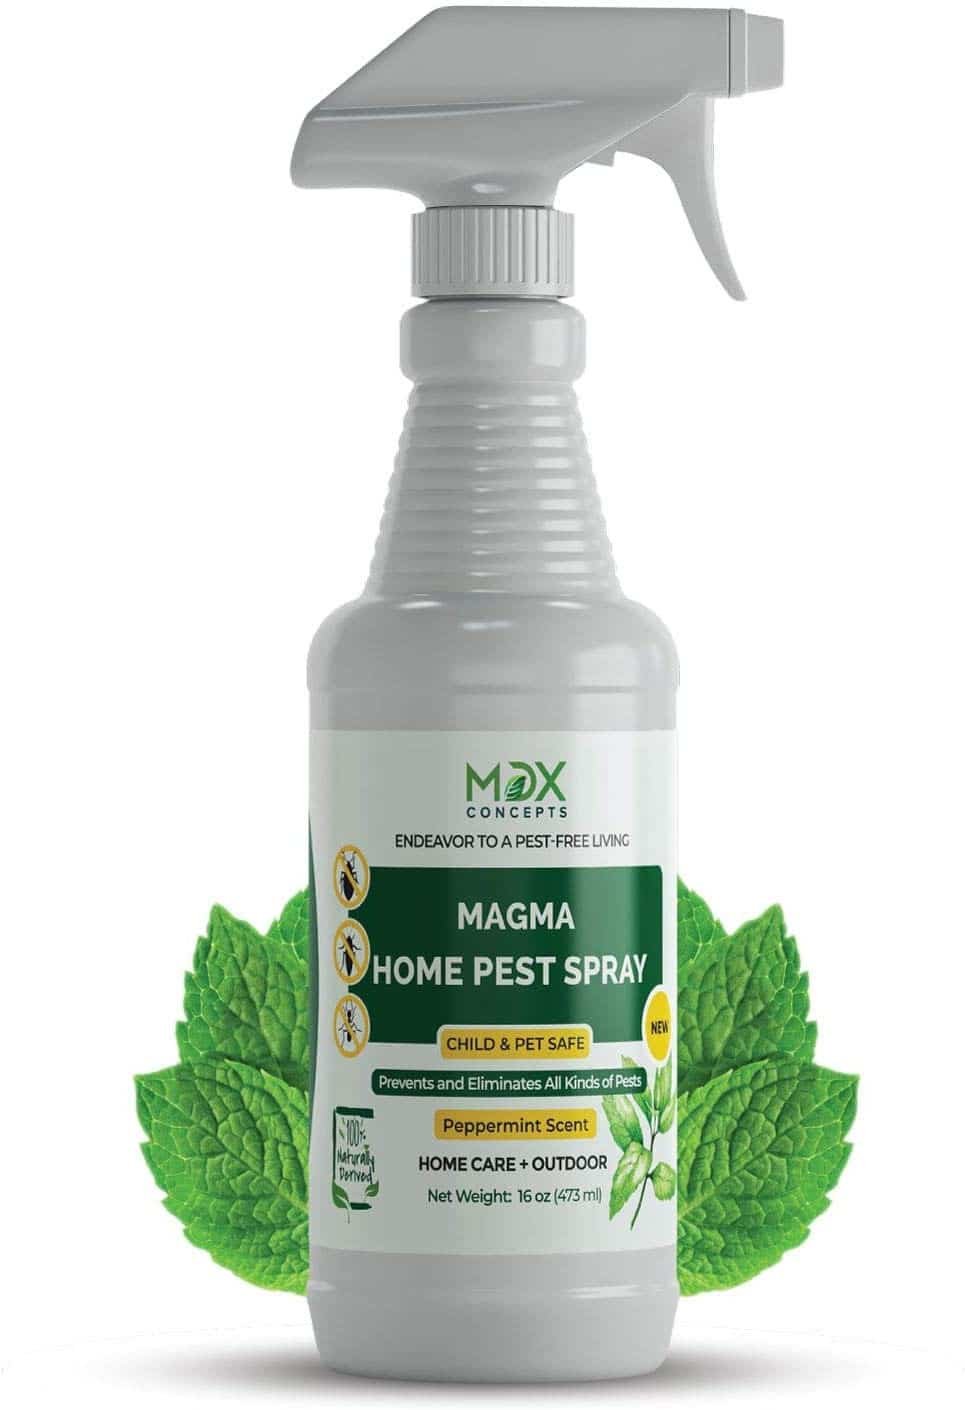 Organic Home Pest Control Spray by mdxConcepts